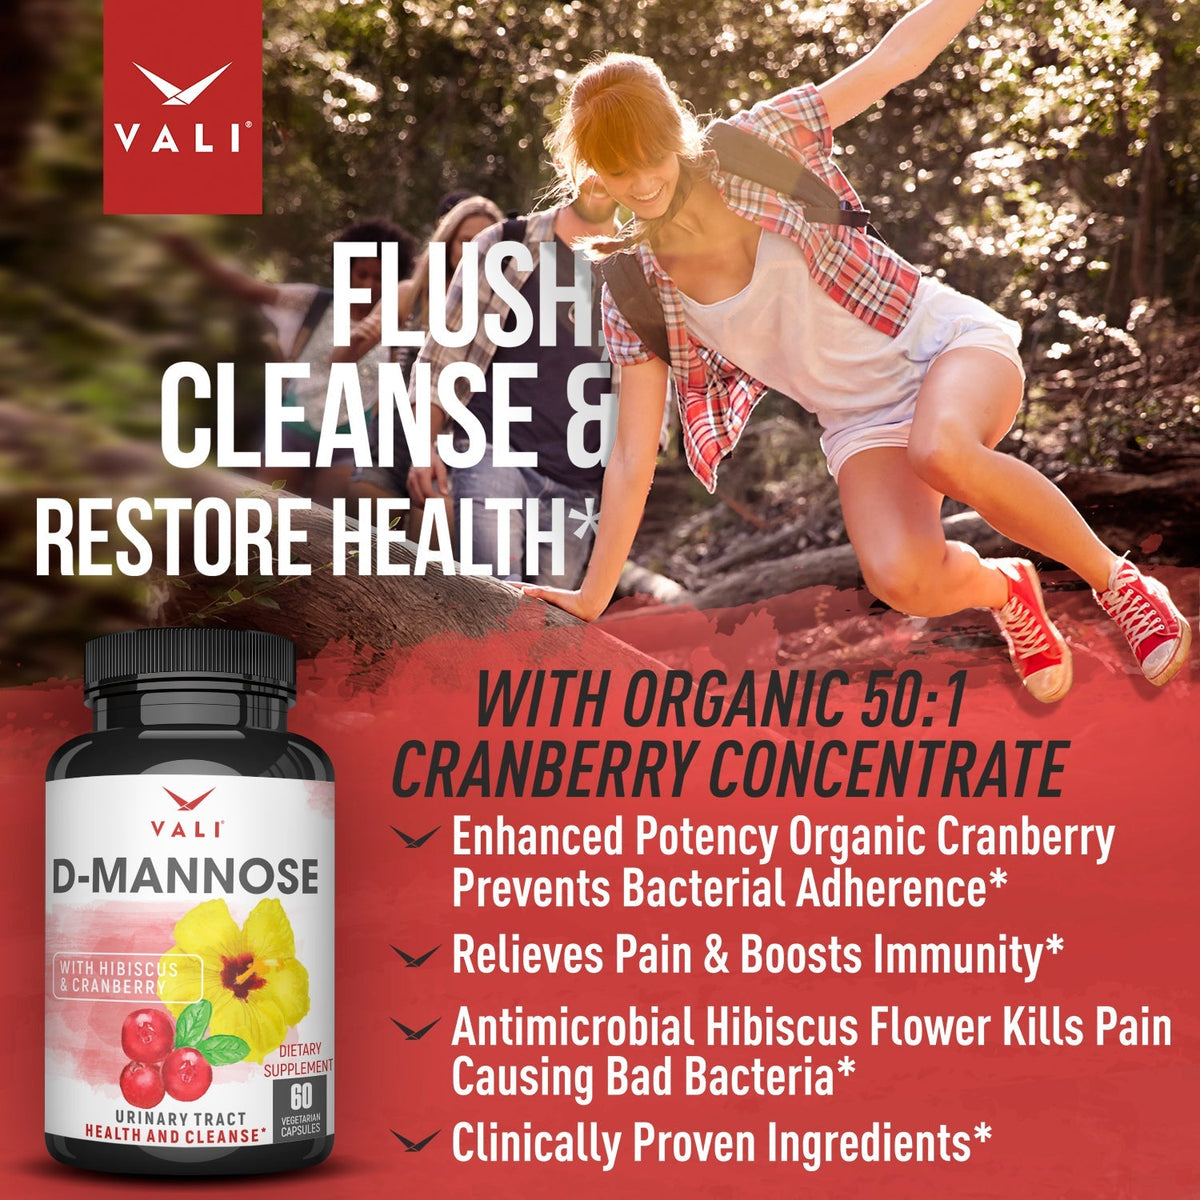 VALI D-Mannose UTI Support - Urinary Tract Health &amp; Cleanse [OFFER]